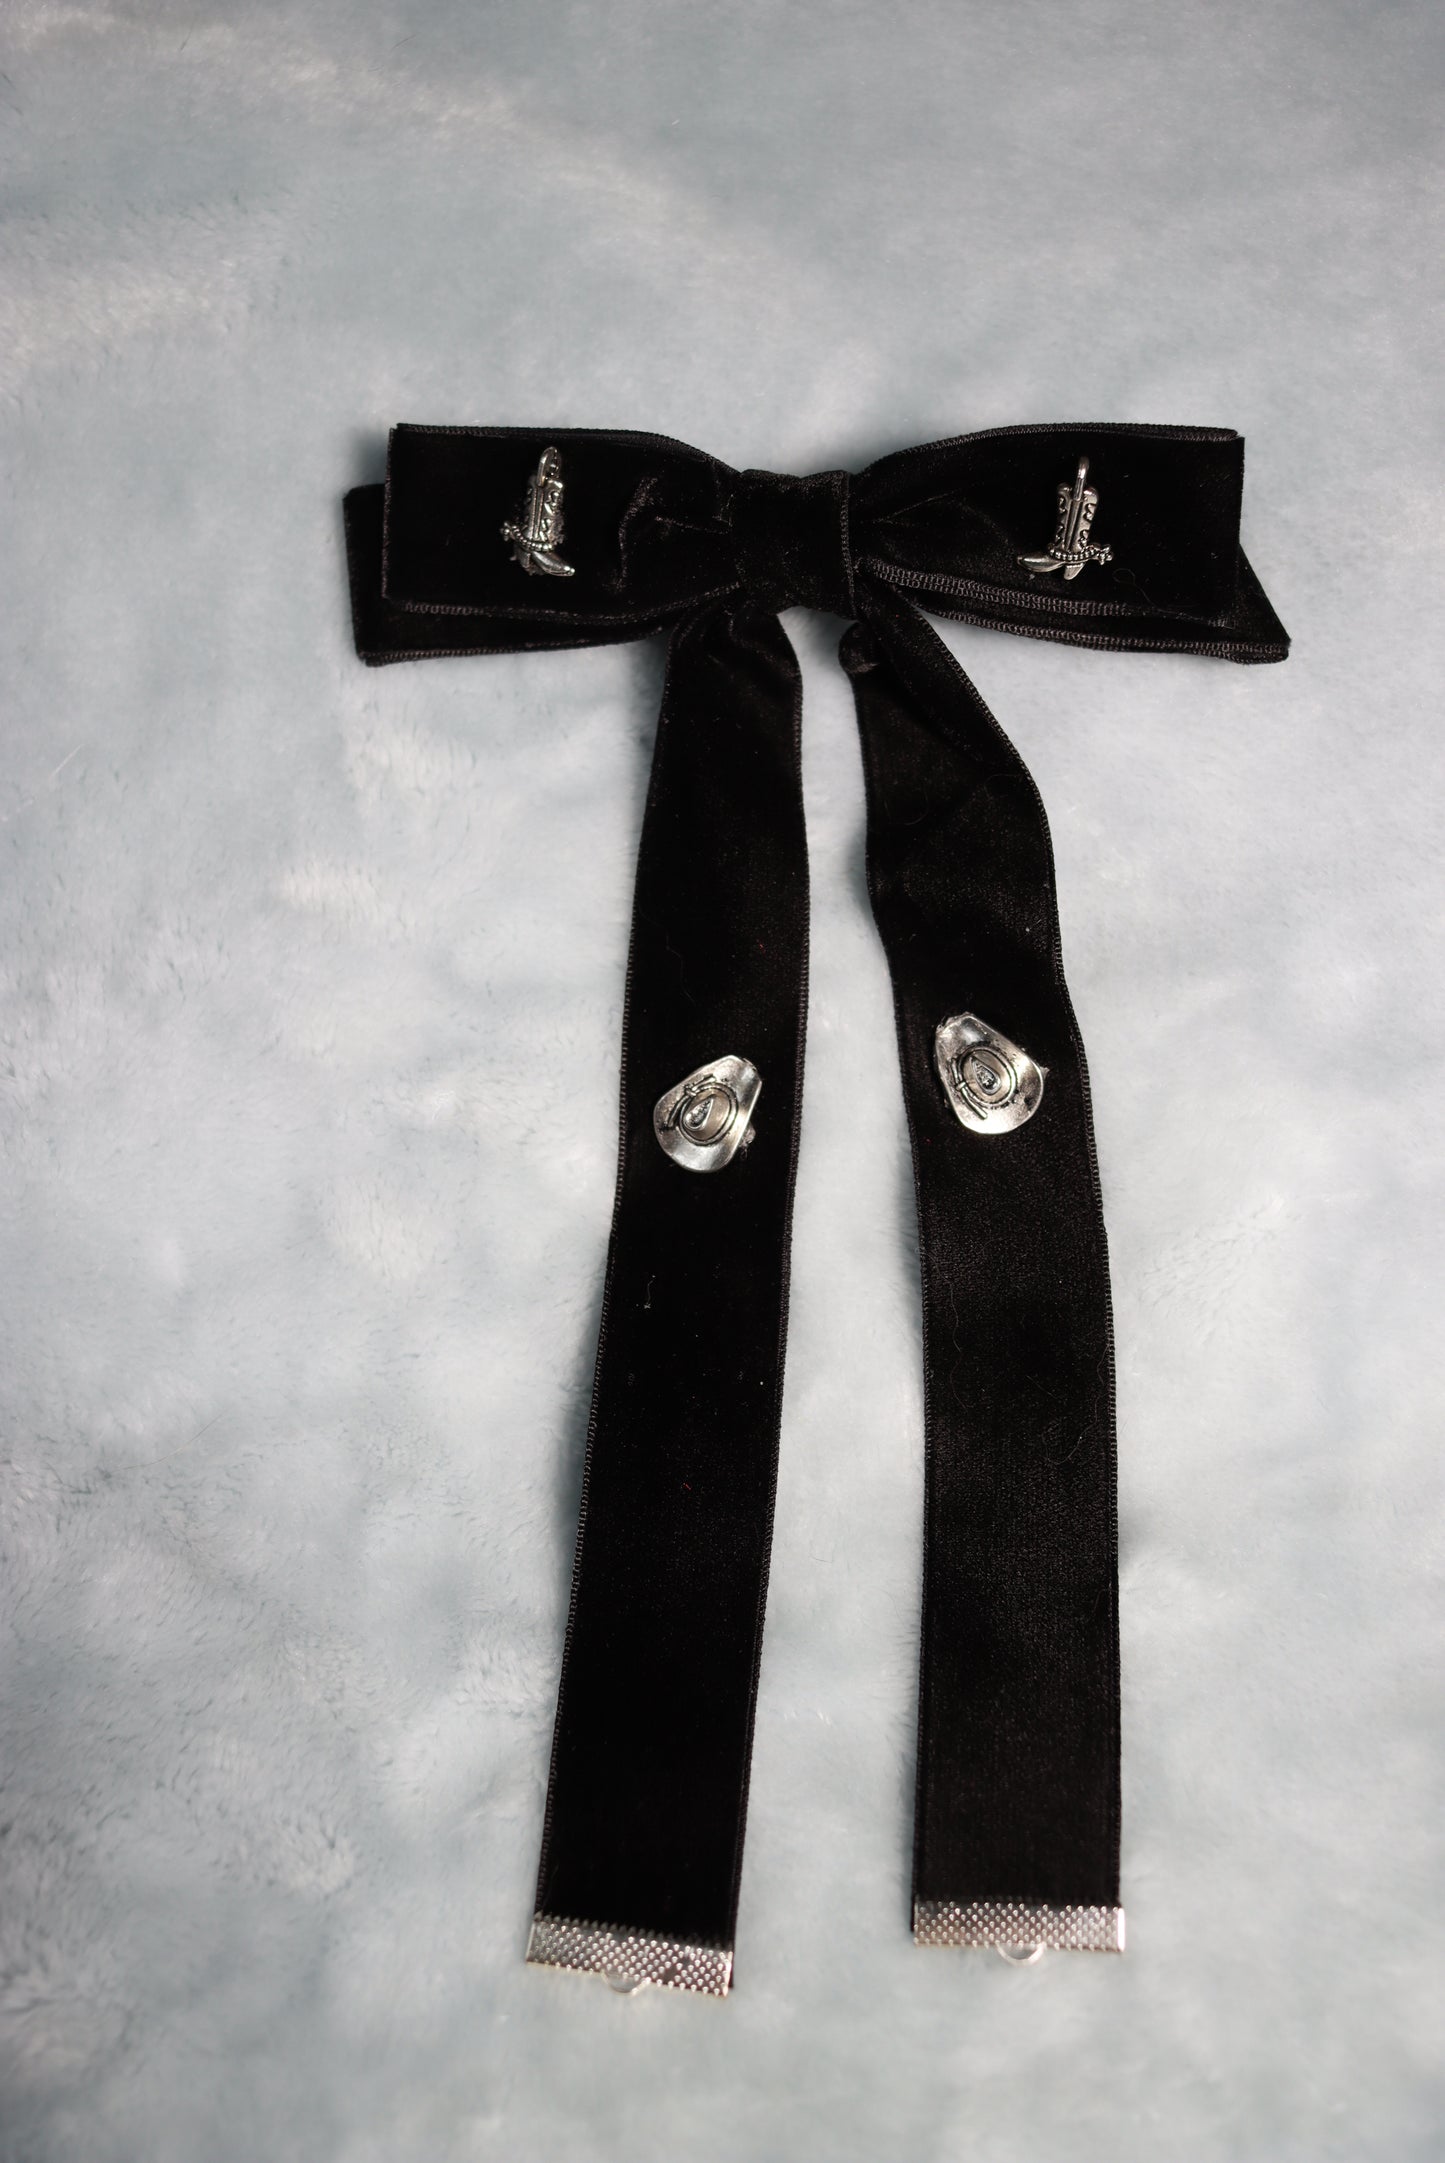 Black Velvet Hats and Boots Western Cowboy Kentucky Square Dance Bow Tie